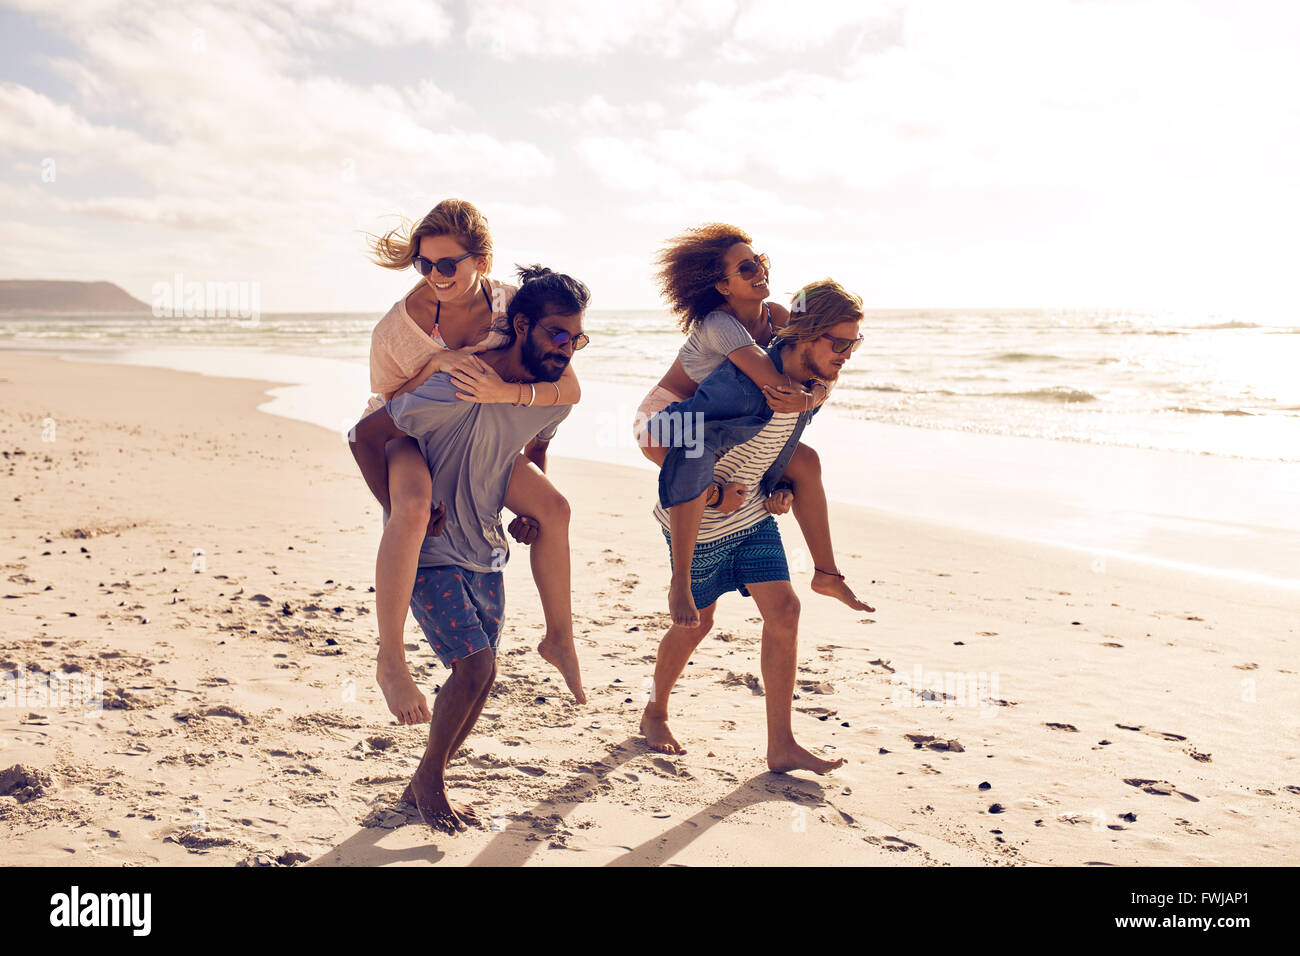 Two beautiful young couples walking along the beach, with men giving piggyback ride to women. Piggyback games on beach vacation. Stock Photo